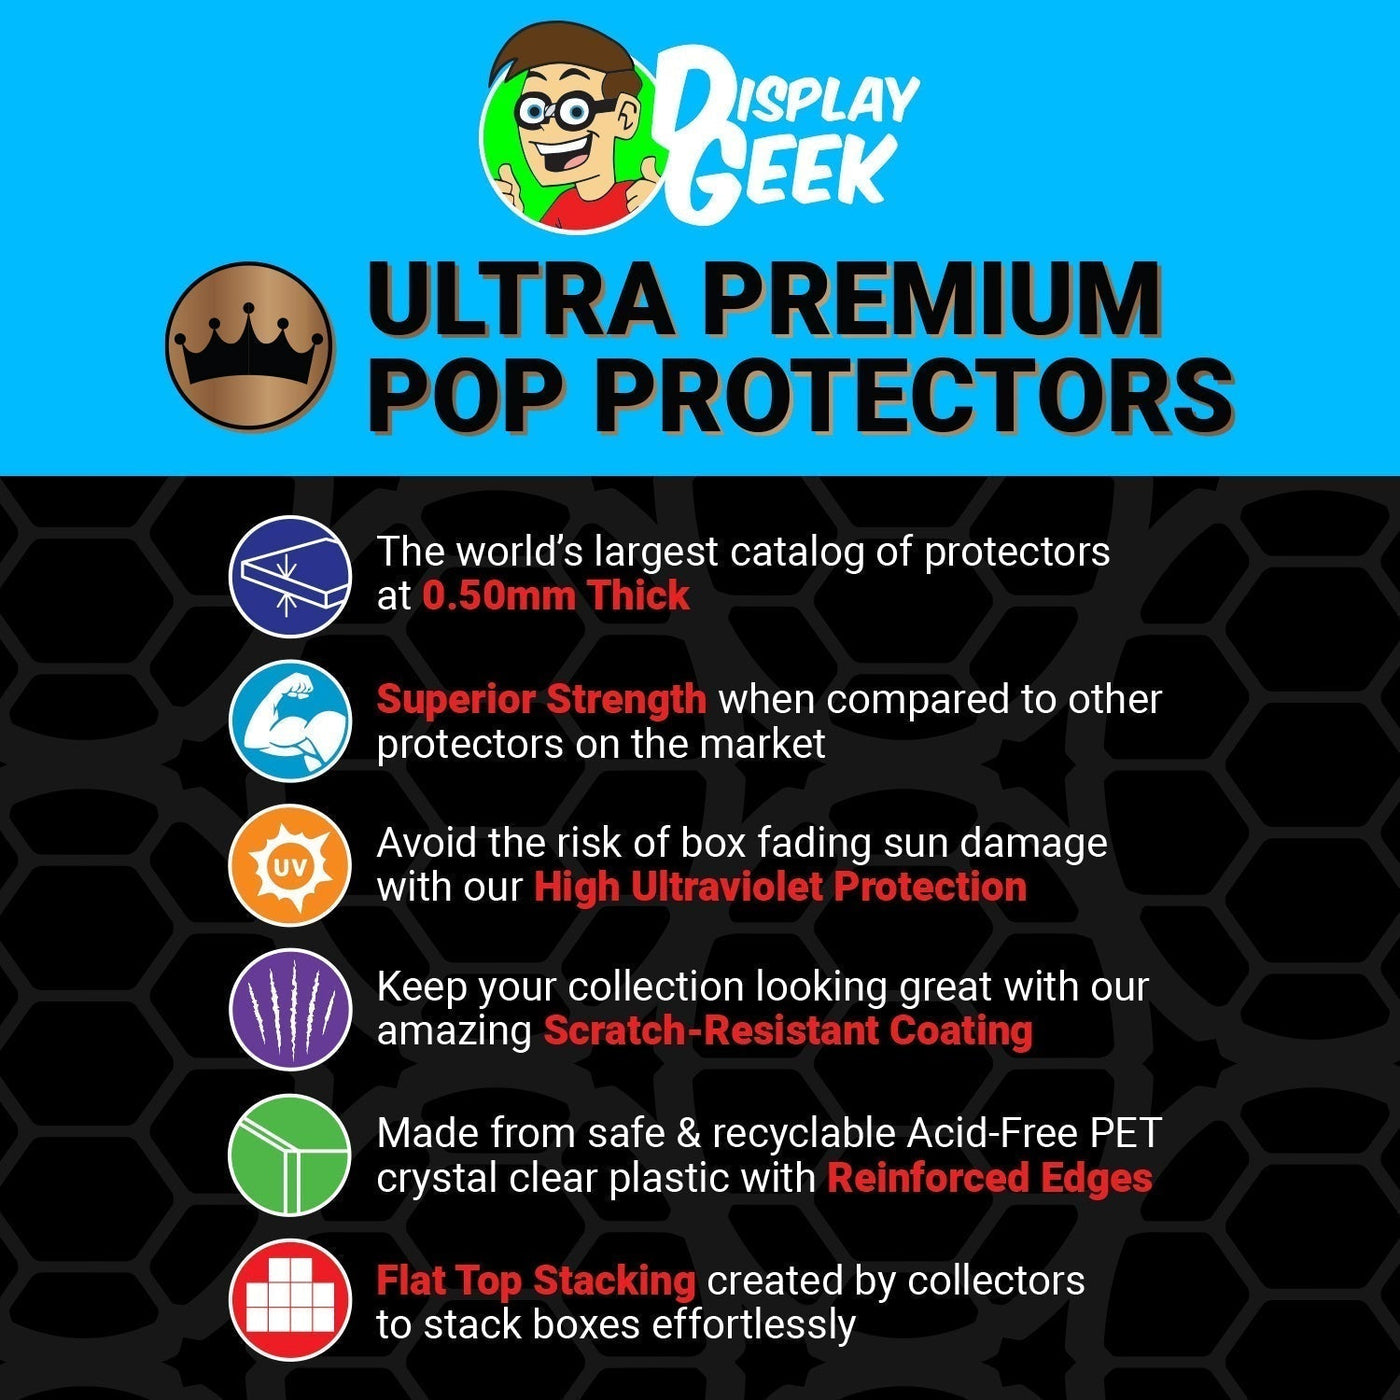 Pop Protector for 2 Pack Yuji Itadori & Aoi Todo Funko Pop on The Protector Guide App by Display Geek